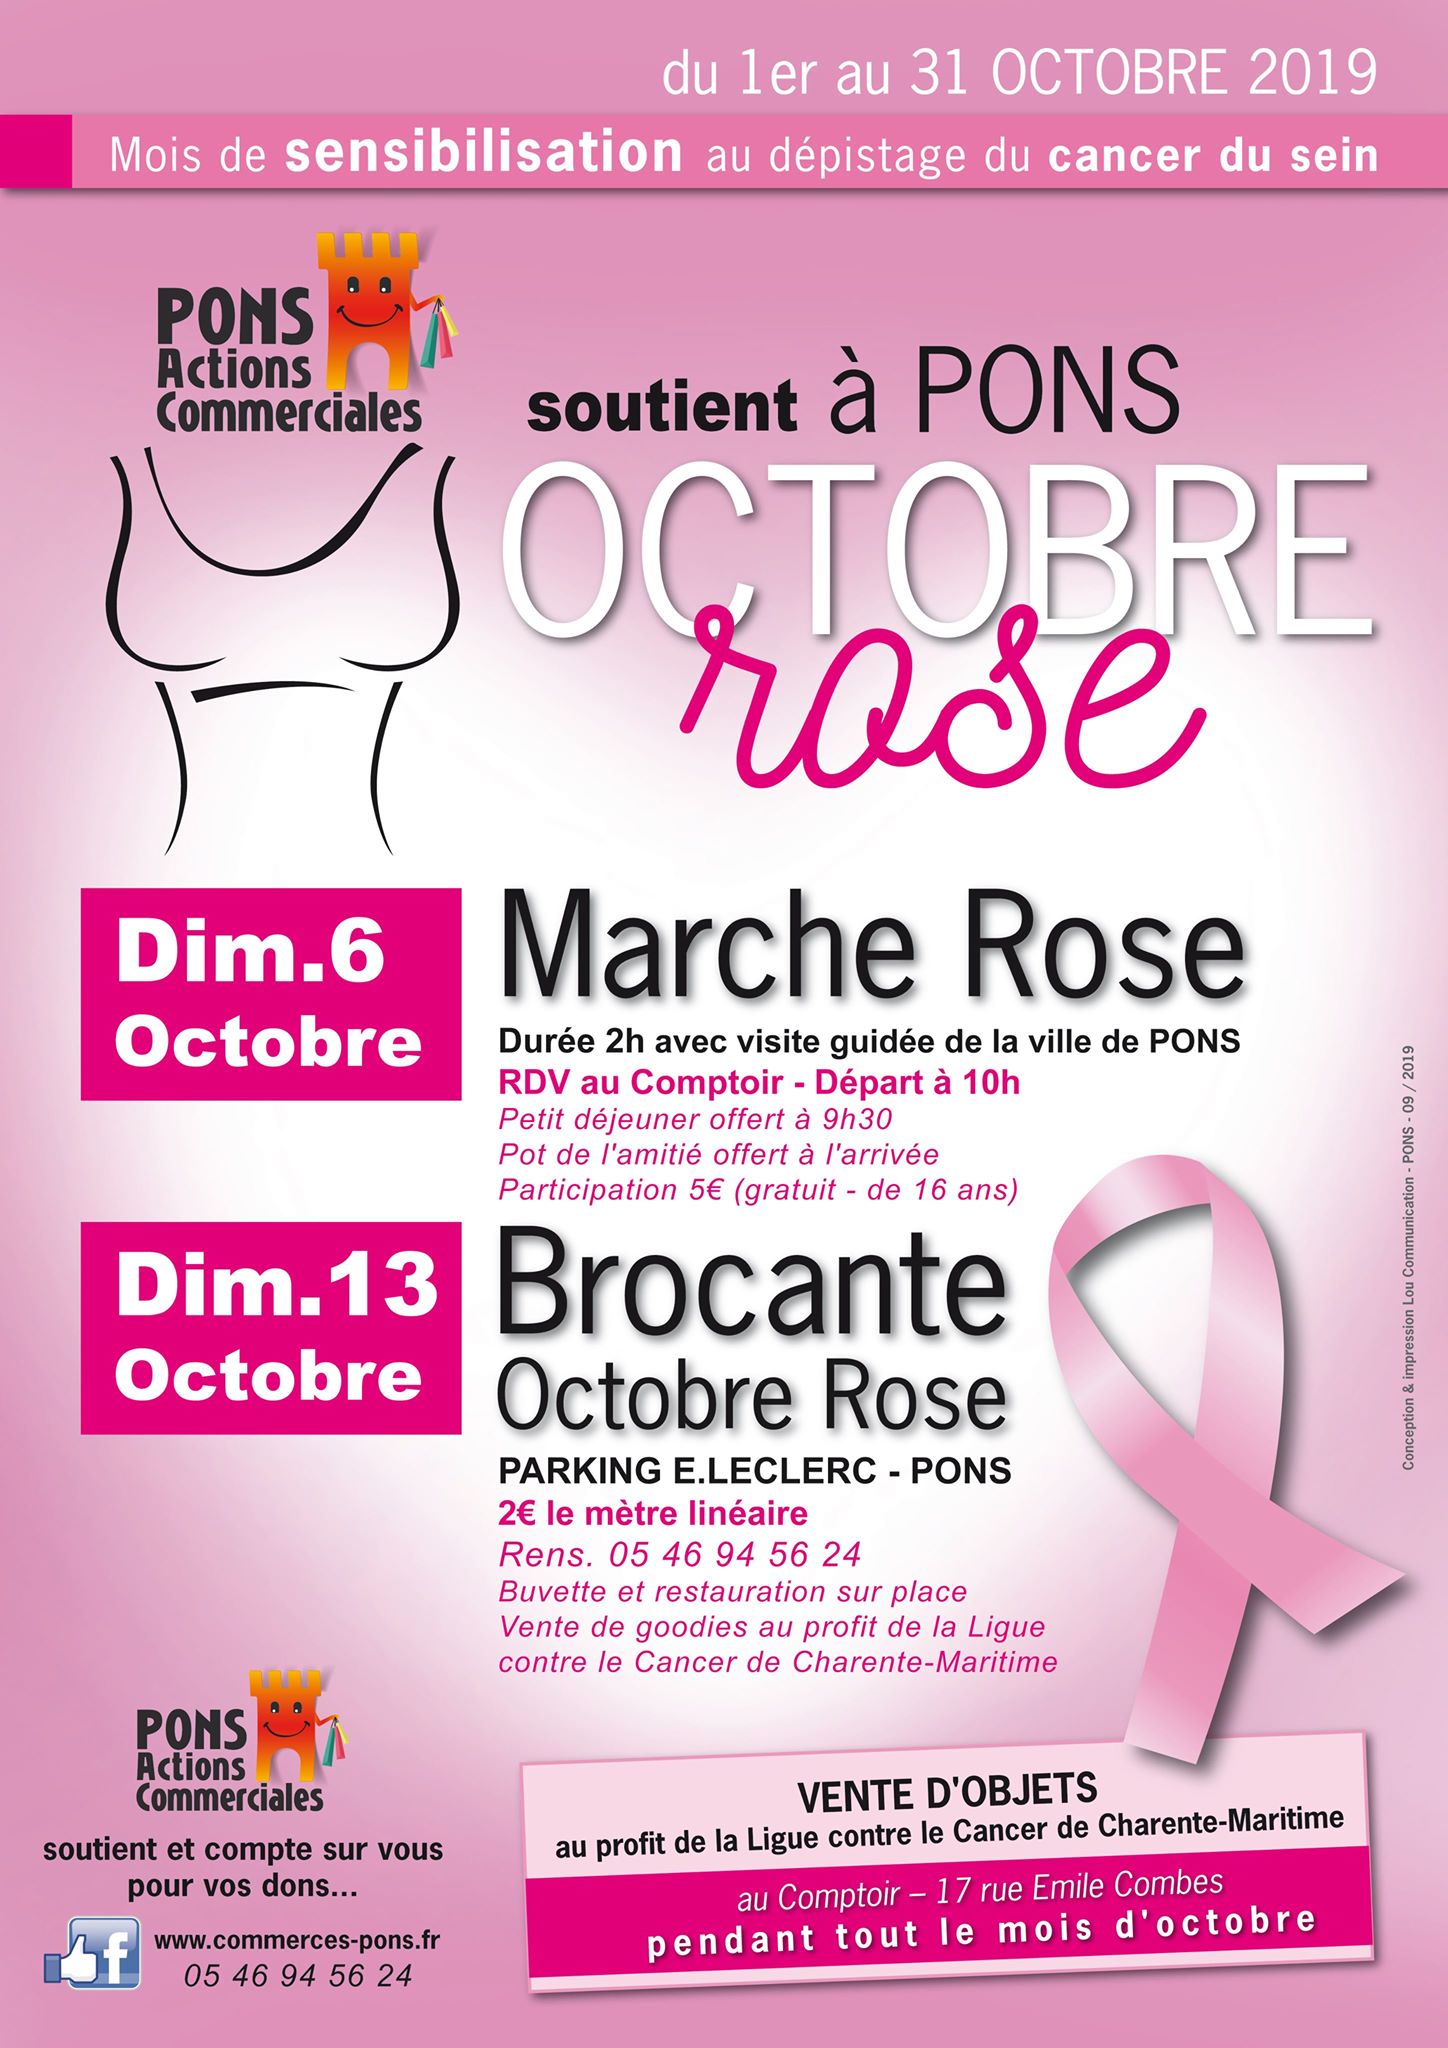 Octobre rose - Pons Actions Commerciales - Marche rose - Brocante